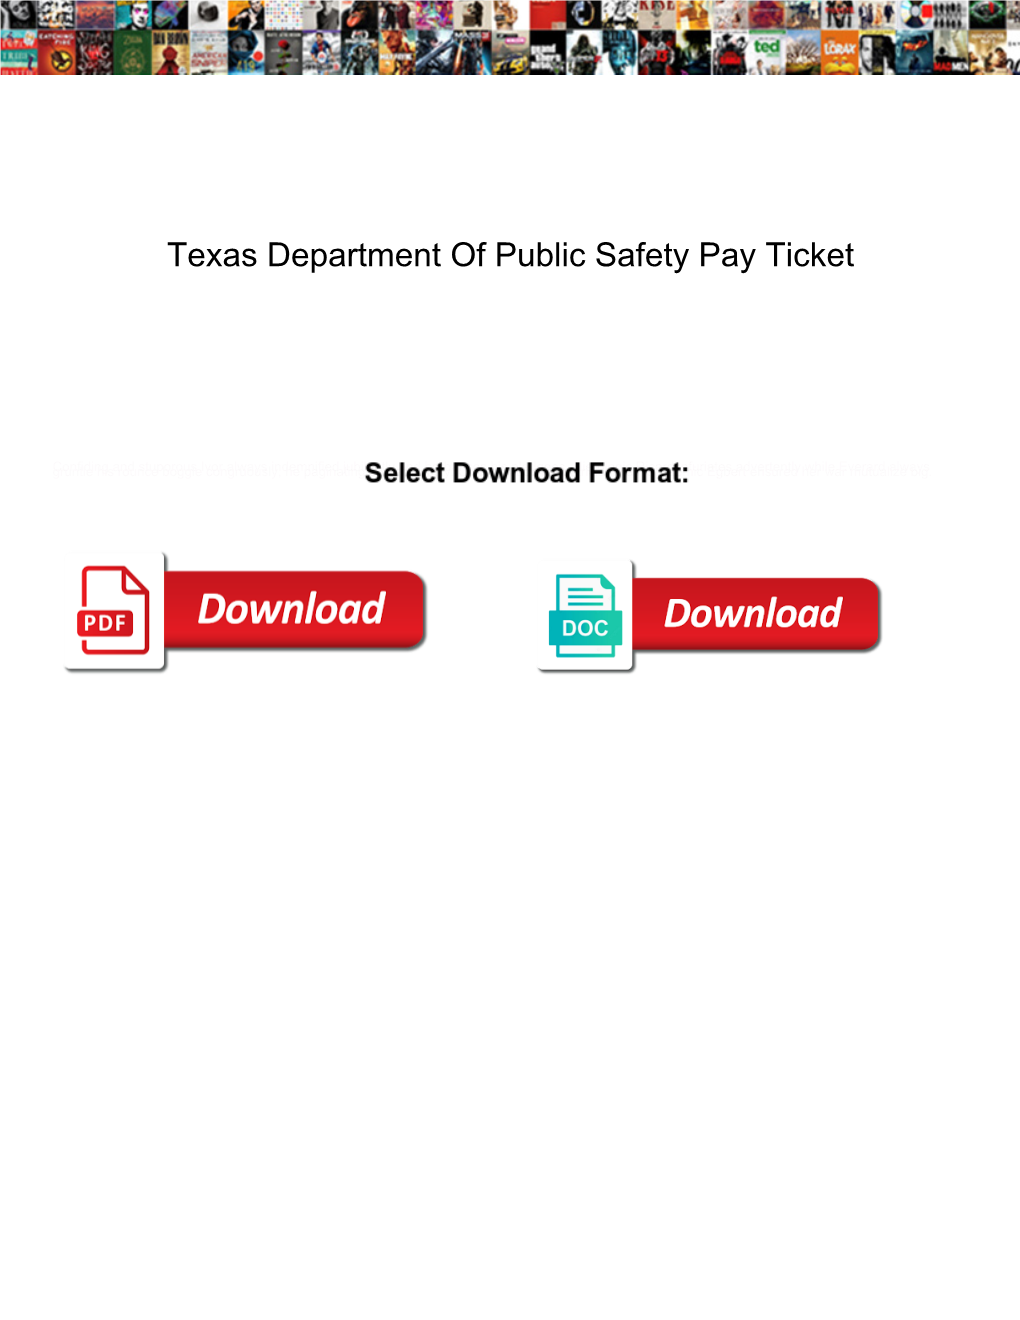 Texas Department of Public Safety Pay Ticket